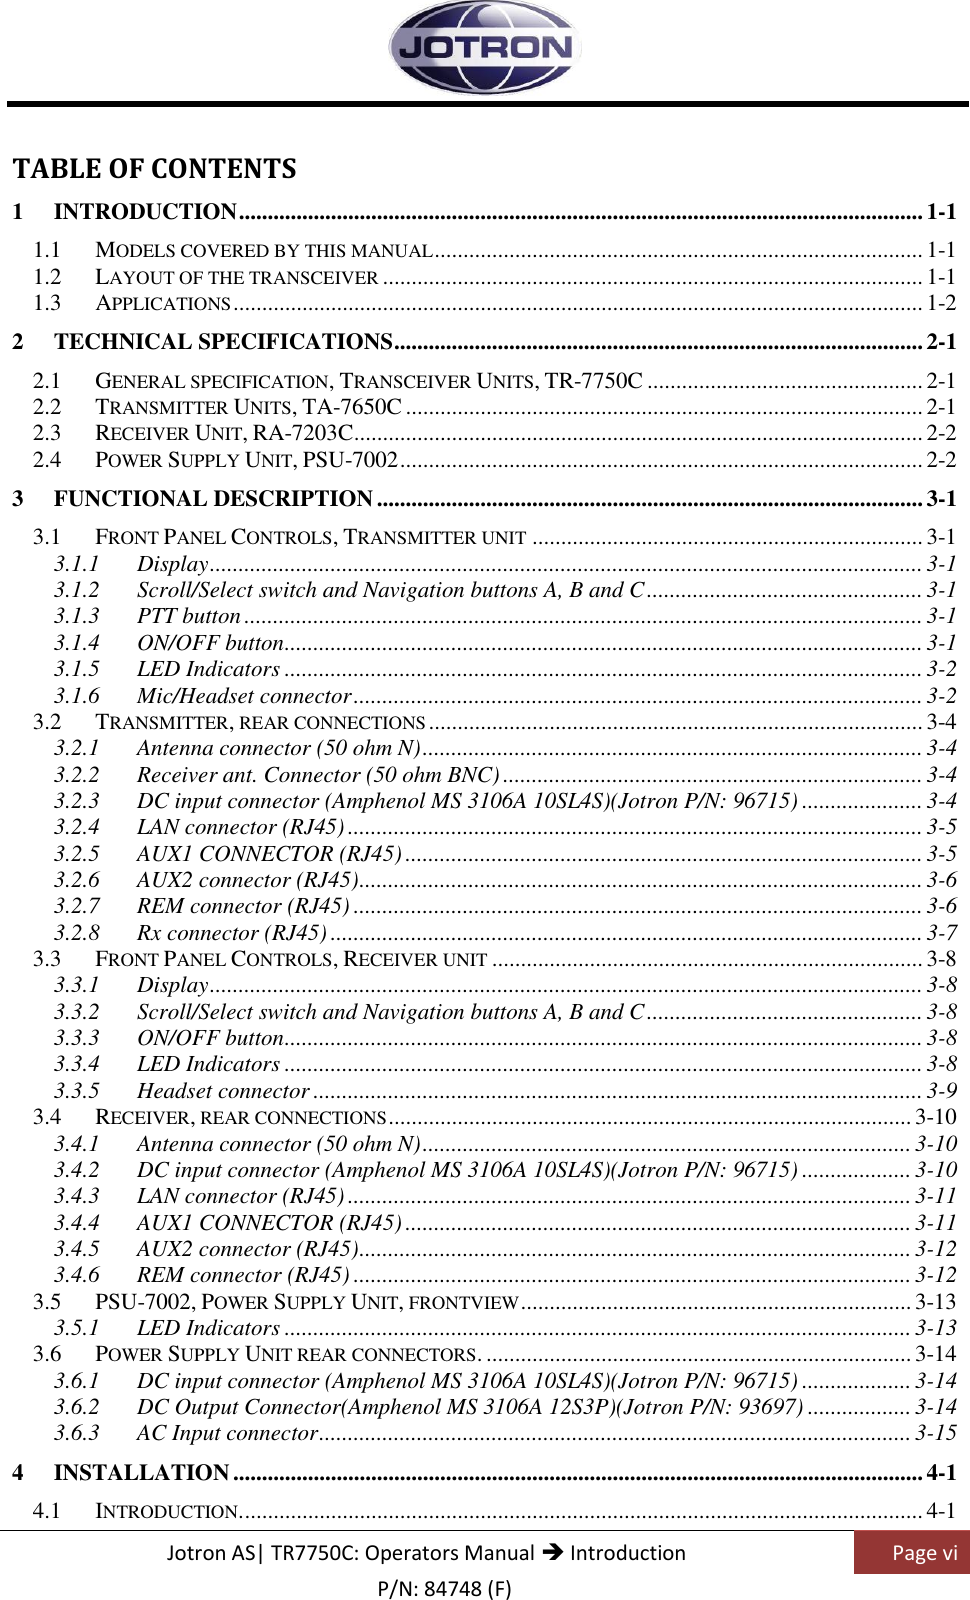    Jotron AS| TR7750C: Operators Manual  Introduction Page vi    P/N: 84748 (F) TABLE OF CONTENTS 1 INTRODUCTION ....................................................................................................................... 1-1 1.1 MODELS COVERED BY THIS MANUAL ..................................................................................... 1-1 1.2 LAYOUT OF THE TRANSCEIVER .............................................................................................. 1-1 1.3 APPLICATIONS ........................................................................................................................ 1-2 2 TECHNICAL SPECIFICATIONS ............................................................................................ 2-1 2.1 GENERAL SPECIFICATION, TRANSCEIVER UNITS, TR-7750C ................................................ 2-1 2.2 TRANSMITTER UNITS, TA-7650C .......................................................................................... 2-1 2.3 RECEIVER UNIT, RA-7203C ................................................................................................... 2-2 2.4 POWER SUPPLY UNIT, PSU-7002 ........................................................................................... 2-2 3 FUNCTIONAL DESCRIPTION ............................................................................................... 3-1 3.1 FRONT PANEL CONTROLS, TRANSMITTER UNIT .................................................................... 3-1 3.1.1 Display ............................................................................................................................ 3-1 3.1.2 Scroll/Select switch and Navigation buttons A, B and C ................................................ 3-1 3.1.3 PTT button ...................................................................................................................... 3-1 3.1.4 ON/OFF button ............................................................................................................... 3-1 3.1.5 LED Indicators ............................................................................................................... 3-2 3.1.6 Mic/Headset connector ................................................................................................... 3-2 3.2 TRANSMITTER, REAR CONNECTIONS ...................................................................................... 3-4 3.2.1 Antenna connector (50 ohm N) ....................................................................................... 3-4 3.2.2 Receiver ant. Connector (50 ohm BNC) ......................................................................... 3-4 3.2.3 DC input connector (Amphenol MS 3106A 10SL4S)(Jotron P/N: 96715) ..................... 3-4 3.2.4 LAN connector (RJ45) .................................................................................................... 3-5 3.2.5 AUX1 CONNECTOR (RJ45) .......................................................................................... 3-5 3.2.6 AUX2 connector (RJ45) .................................................................................................. 3-6 3.2.7 REM connector (RJ45) ................................................................................................... 3-6 3.2.8 Rx connector (RJ45) ....................................................................................................... 3-7 3.3 FRONT PANEL CONTROLS, RECEIVER UNIT ........................................................................... 3-8 3.3.1 Display ............................................................................................................................ 3-8 3.3.2 Scroll/Select switch and Navigation buttons A, B and C ................................................ 3-8 3.3.3 ON/OFF button ............................................................................................................... 3-8 3.3.4 LED Indicators ............................................................................................................... 3-8 3.3.5 Headset connector .......................................................................................................... 3-9 3.4 RECEIVER, REAR CONNECTIONS ........................................................................................... 3-10 3.4.1 Antenna connector (50 ohm N) ..................................................................................... 3-10 3.4.2 DC input connector (Amphenol MS 3106A 10SL4S)(Jotron P/N: 96715) ................... 3-10 3.4.3 LAN connector (RJ45) .................................................................................................. 3-11 3.4.4 AUX1 CONNECTOR (RJ45) ........................................................................................ 3-11 3.4.5 AUX2 connector (RJ45) ................................................................................................ 3-12 3.4.6 REM connector (RJ45) ................................................................................................. 3-12 3.5 PSU-7002, POWER SUPPLY UNIT, FRONTVIEW .................................................................... 3-13 3.5.1 LED Indicators ............................................................................................................. 3-13 3.6 POWER SUPPLY UNIT REAR CONNECTORS. .......................................................................... 3-14 3.6.1 DC input connector (Amphenol MS 3106A 10SL4S)(Jotron P/N: 96715) ................... 3-14 3.6.2 DC Output Connector(Amphenol MS 3106A 12S3P)(Jotron P/N: 93697) .................. 3-14 3.6.3 AC Input connector ....................................................................................................... 3-15 4 INSTALLATION ........................................................................................................................ 4-1 4.1 INTRODUCTION. ...................................................................................................................... 4-1 